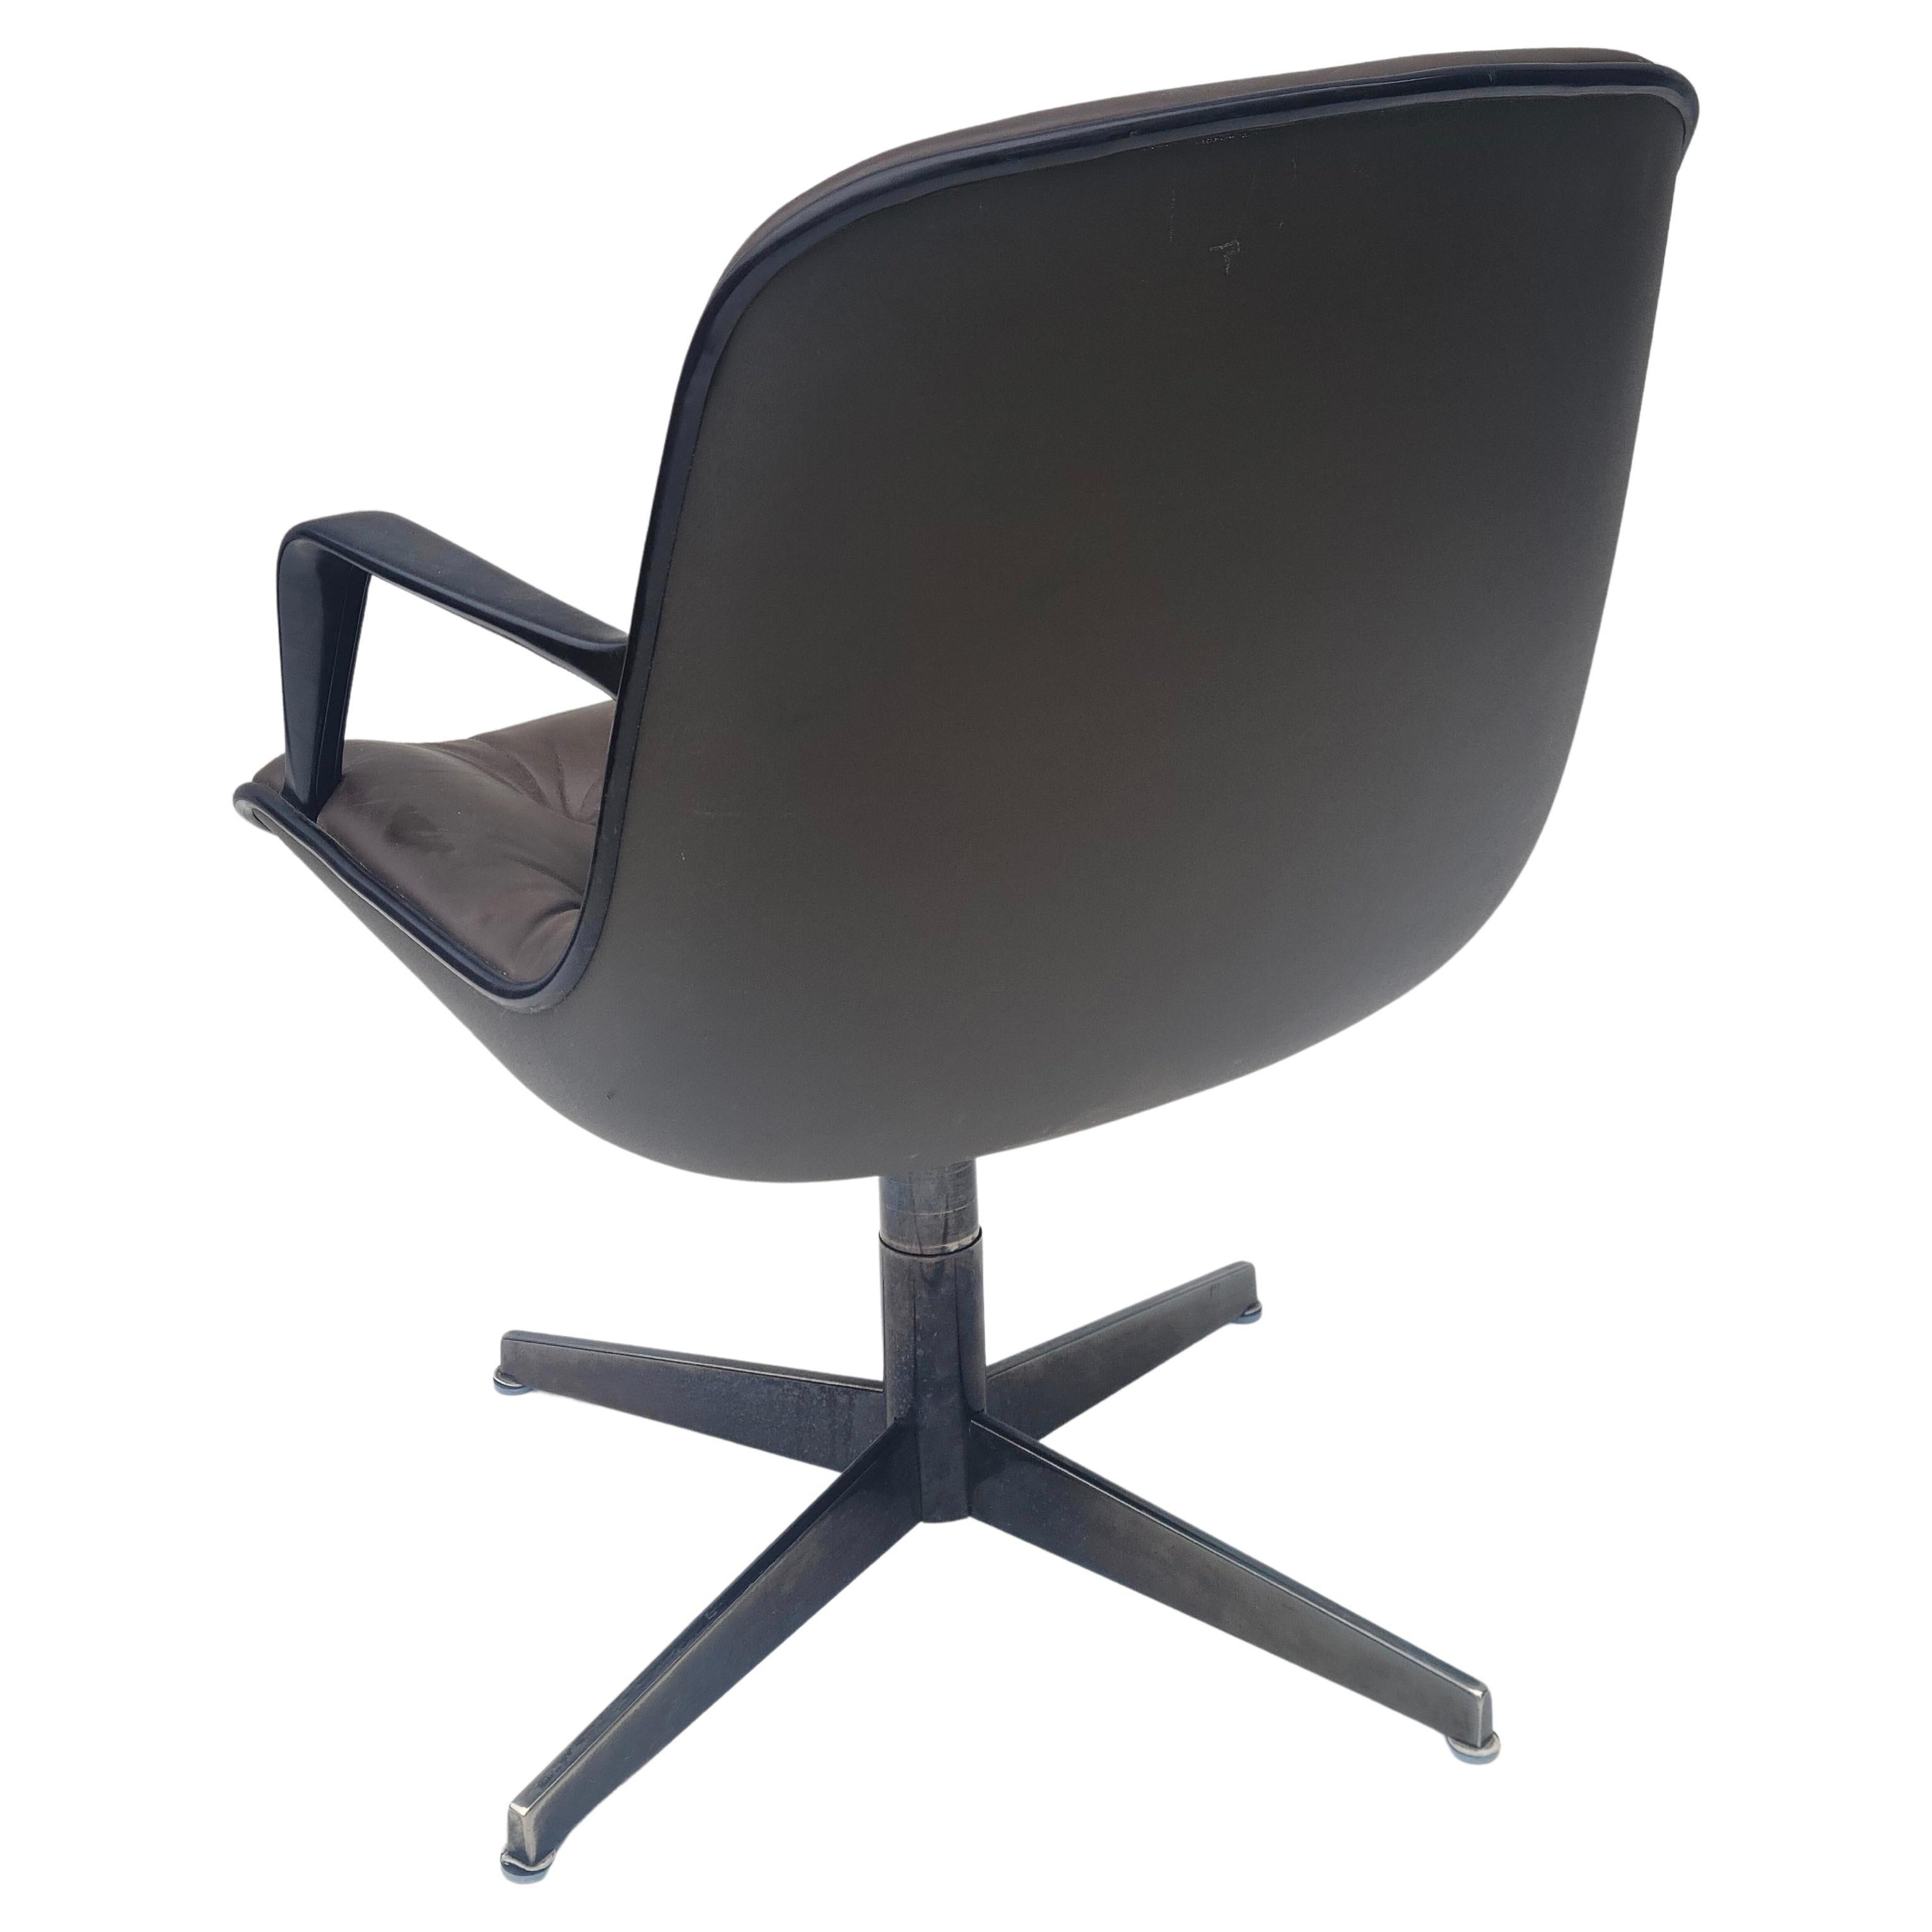 Please feel free to reach out for efficient shipping to your location.

Leather office lounge chair by Steelcase.
Bronze finish base. Brown Leather seating surface.
Swivels, adjusts.